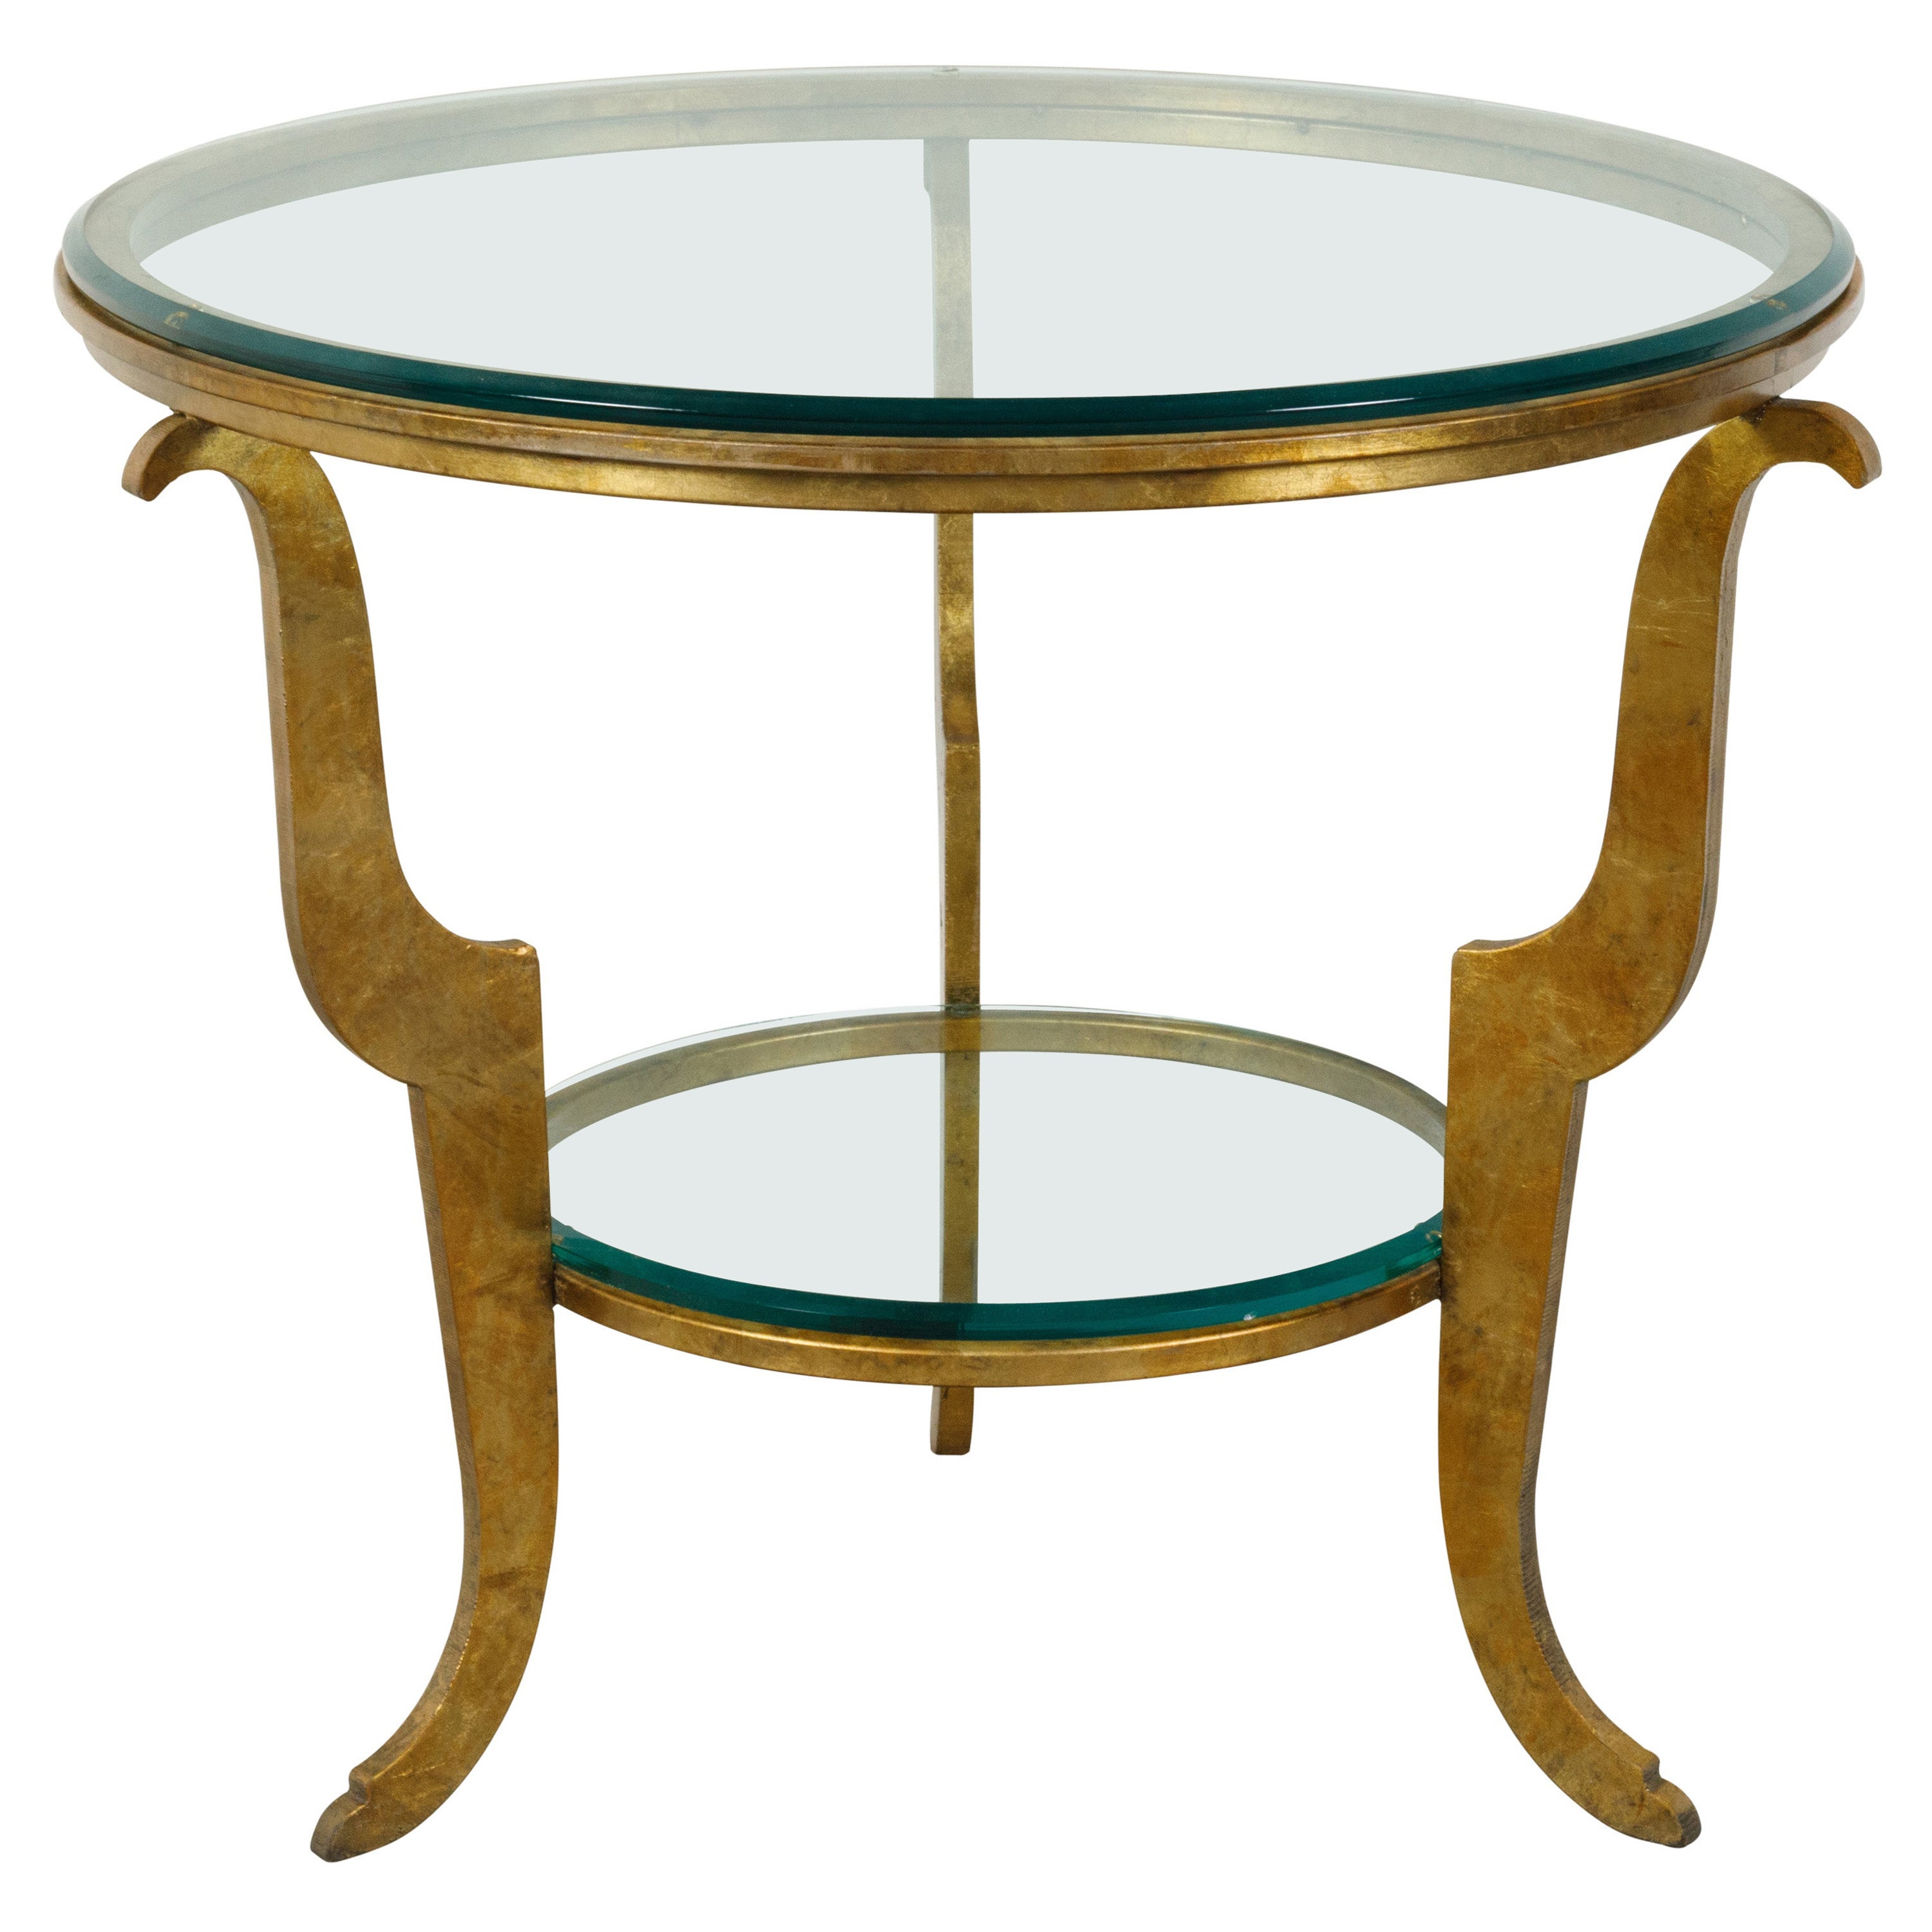 French Midcentury Gilt Iron Center Table with Glass Top and Scrolling Legs